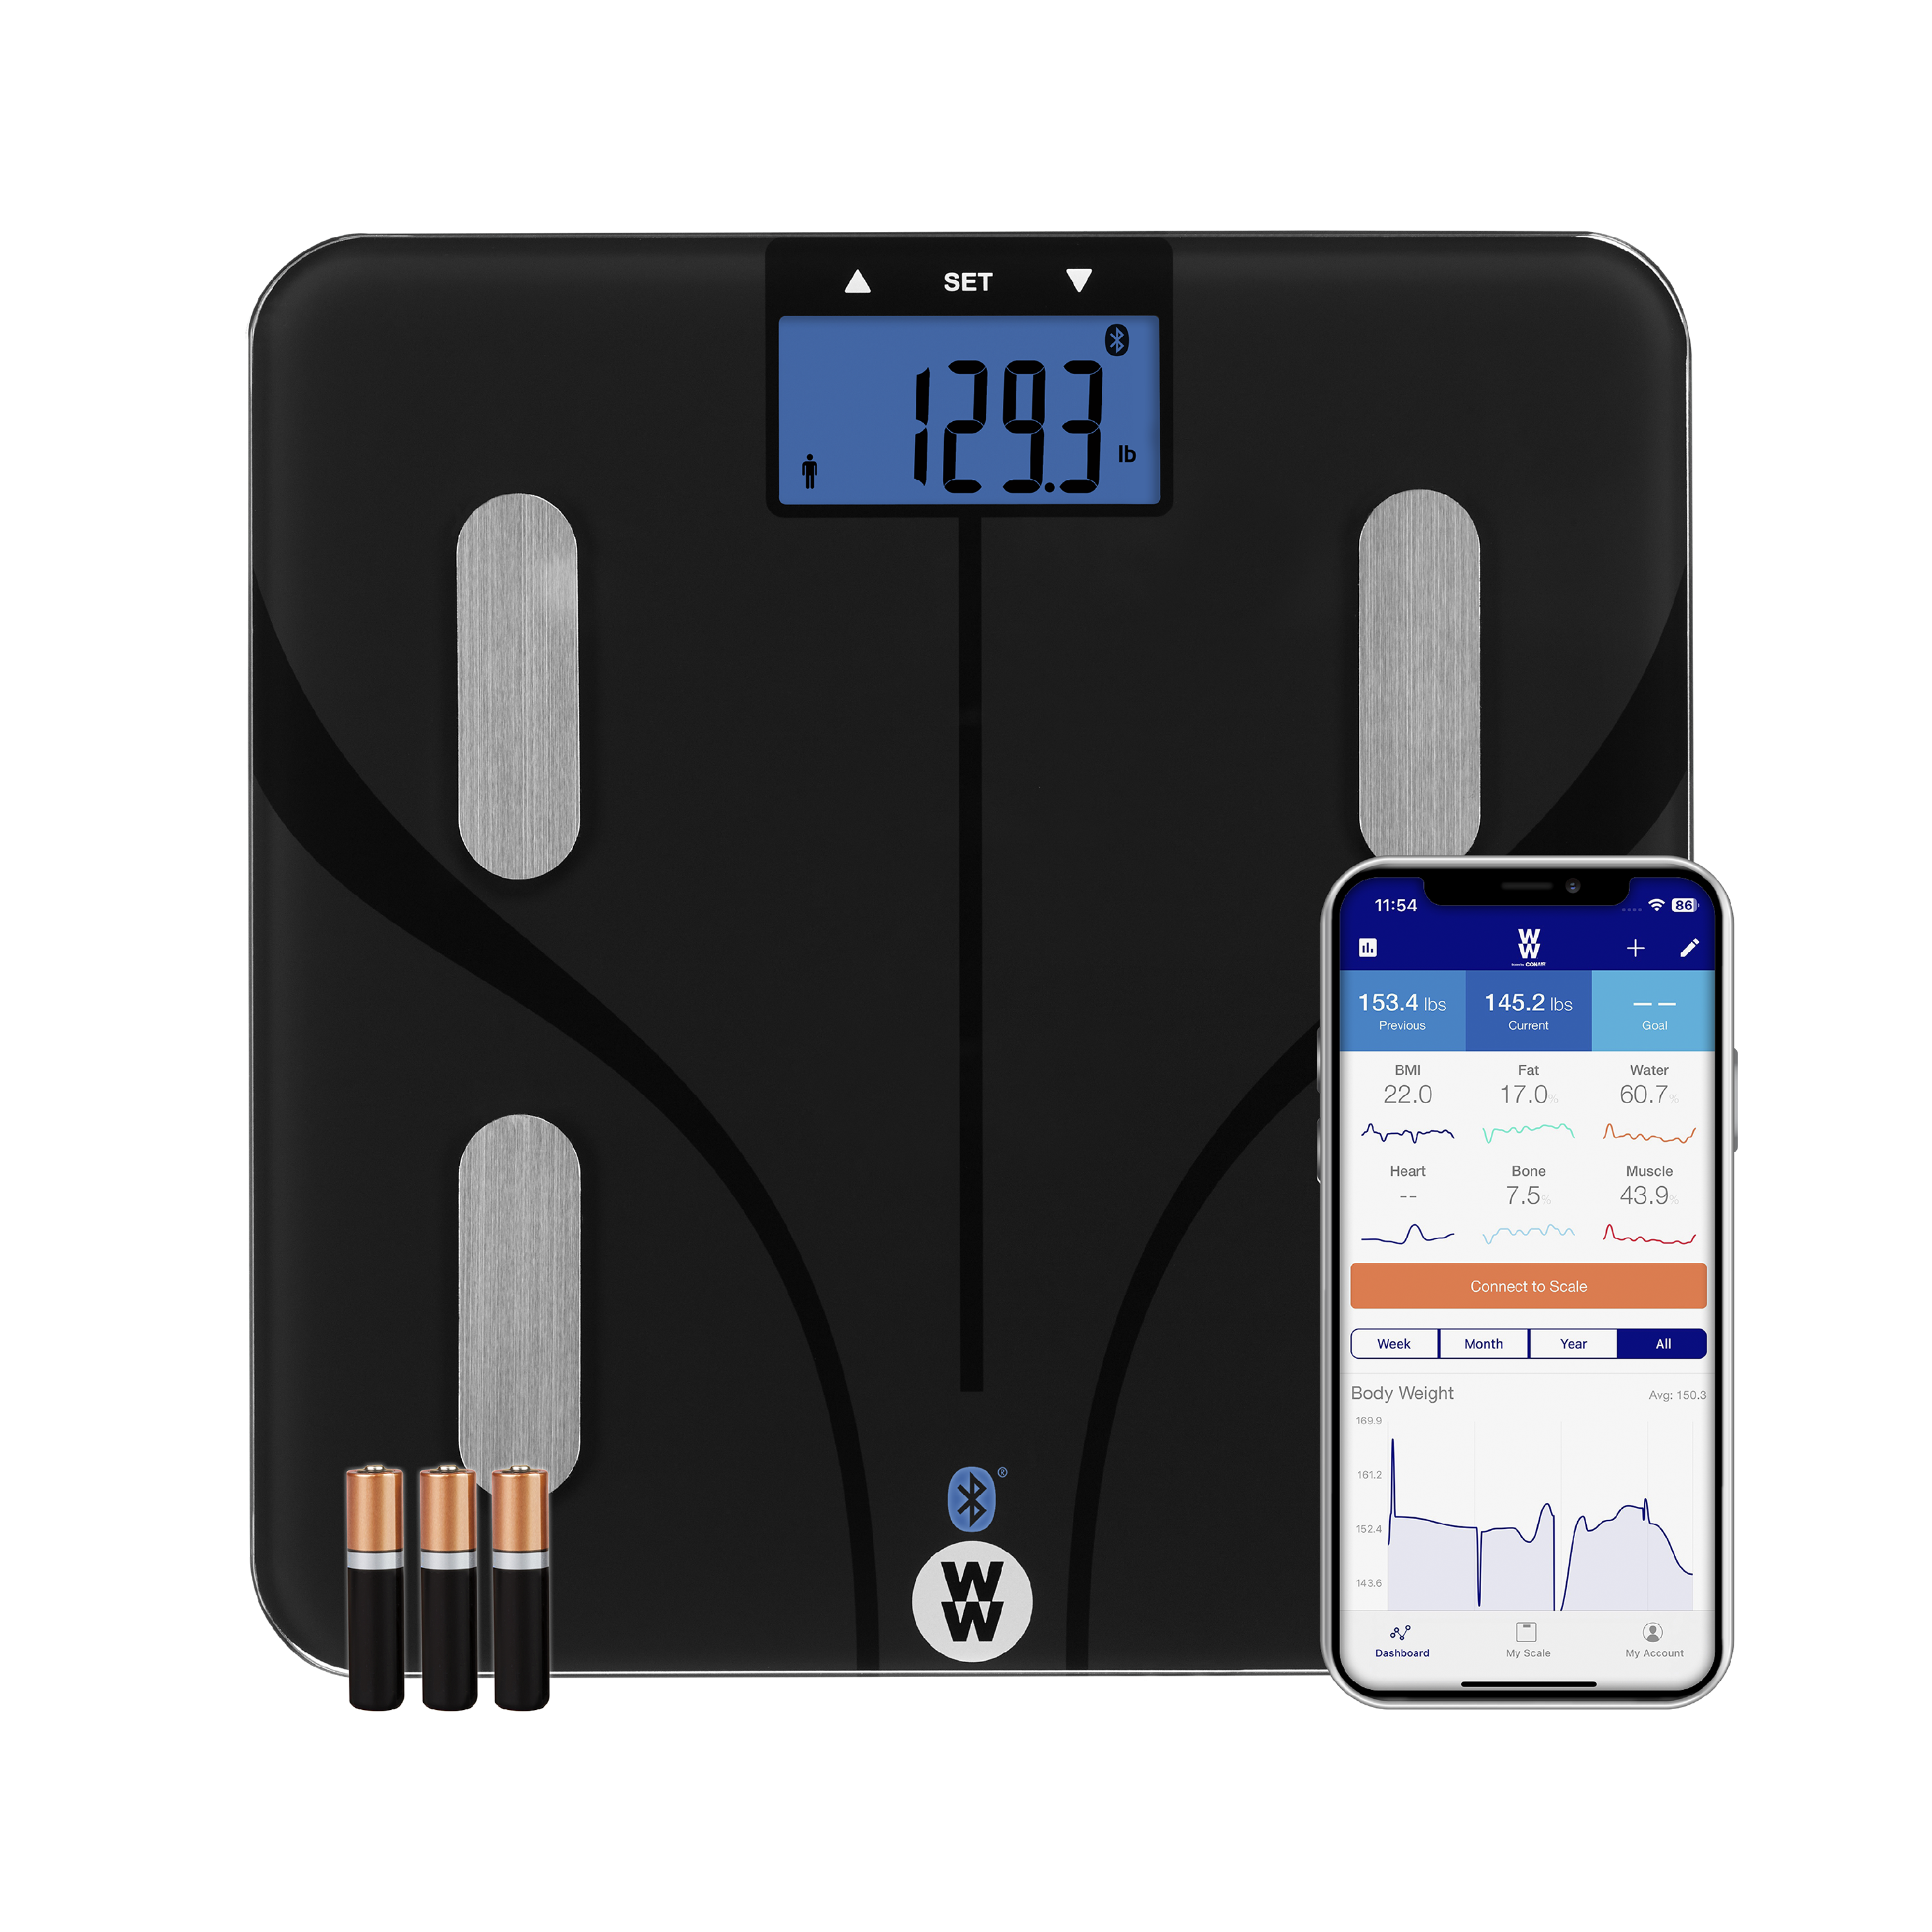 Handheld Body Fat Tester,Portable Body Fat Measurement Device BMI Meter  with LCD Screen,Digital Health Handheld Body Fat Measuring  Instrument,Tracks